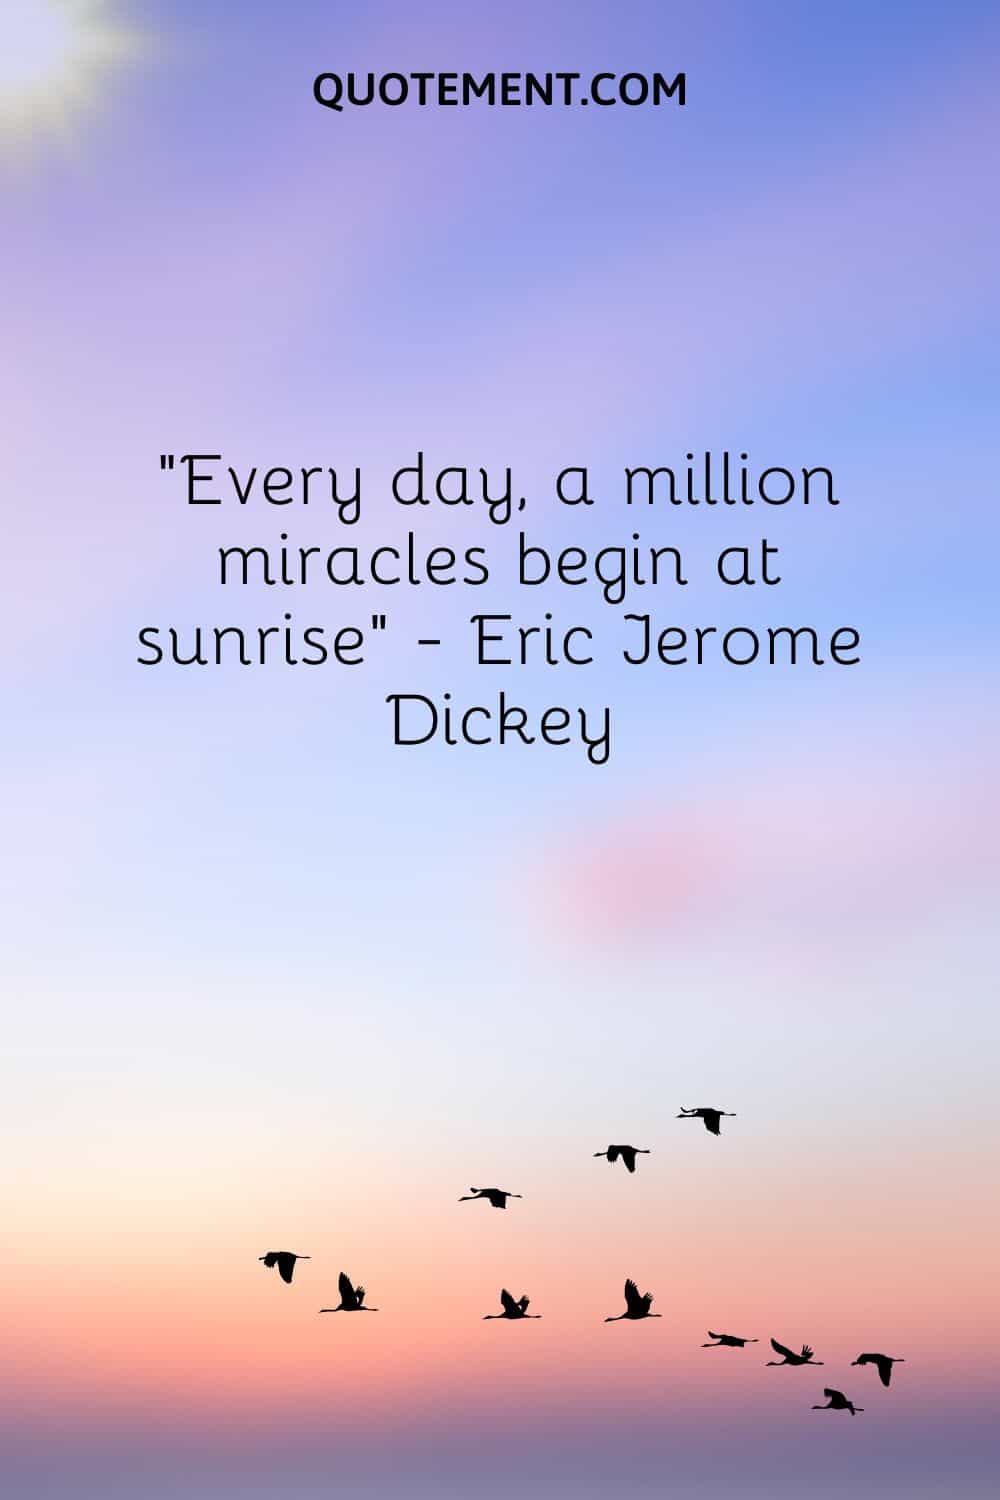 Every day, a million miracles begin at sunrise